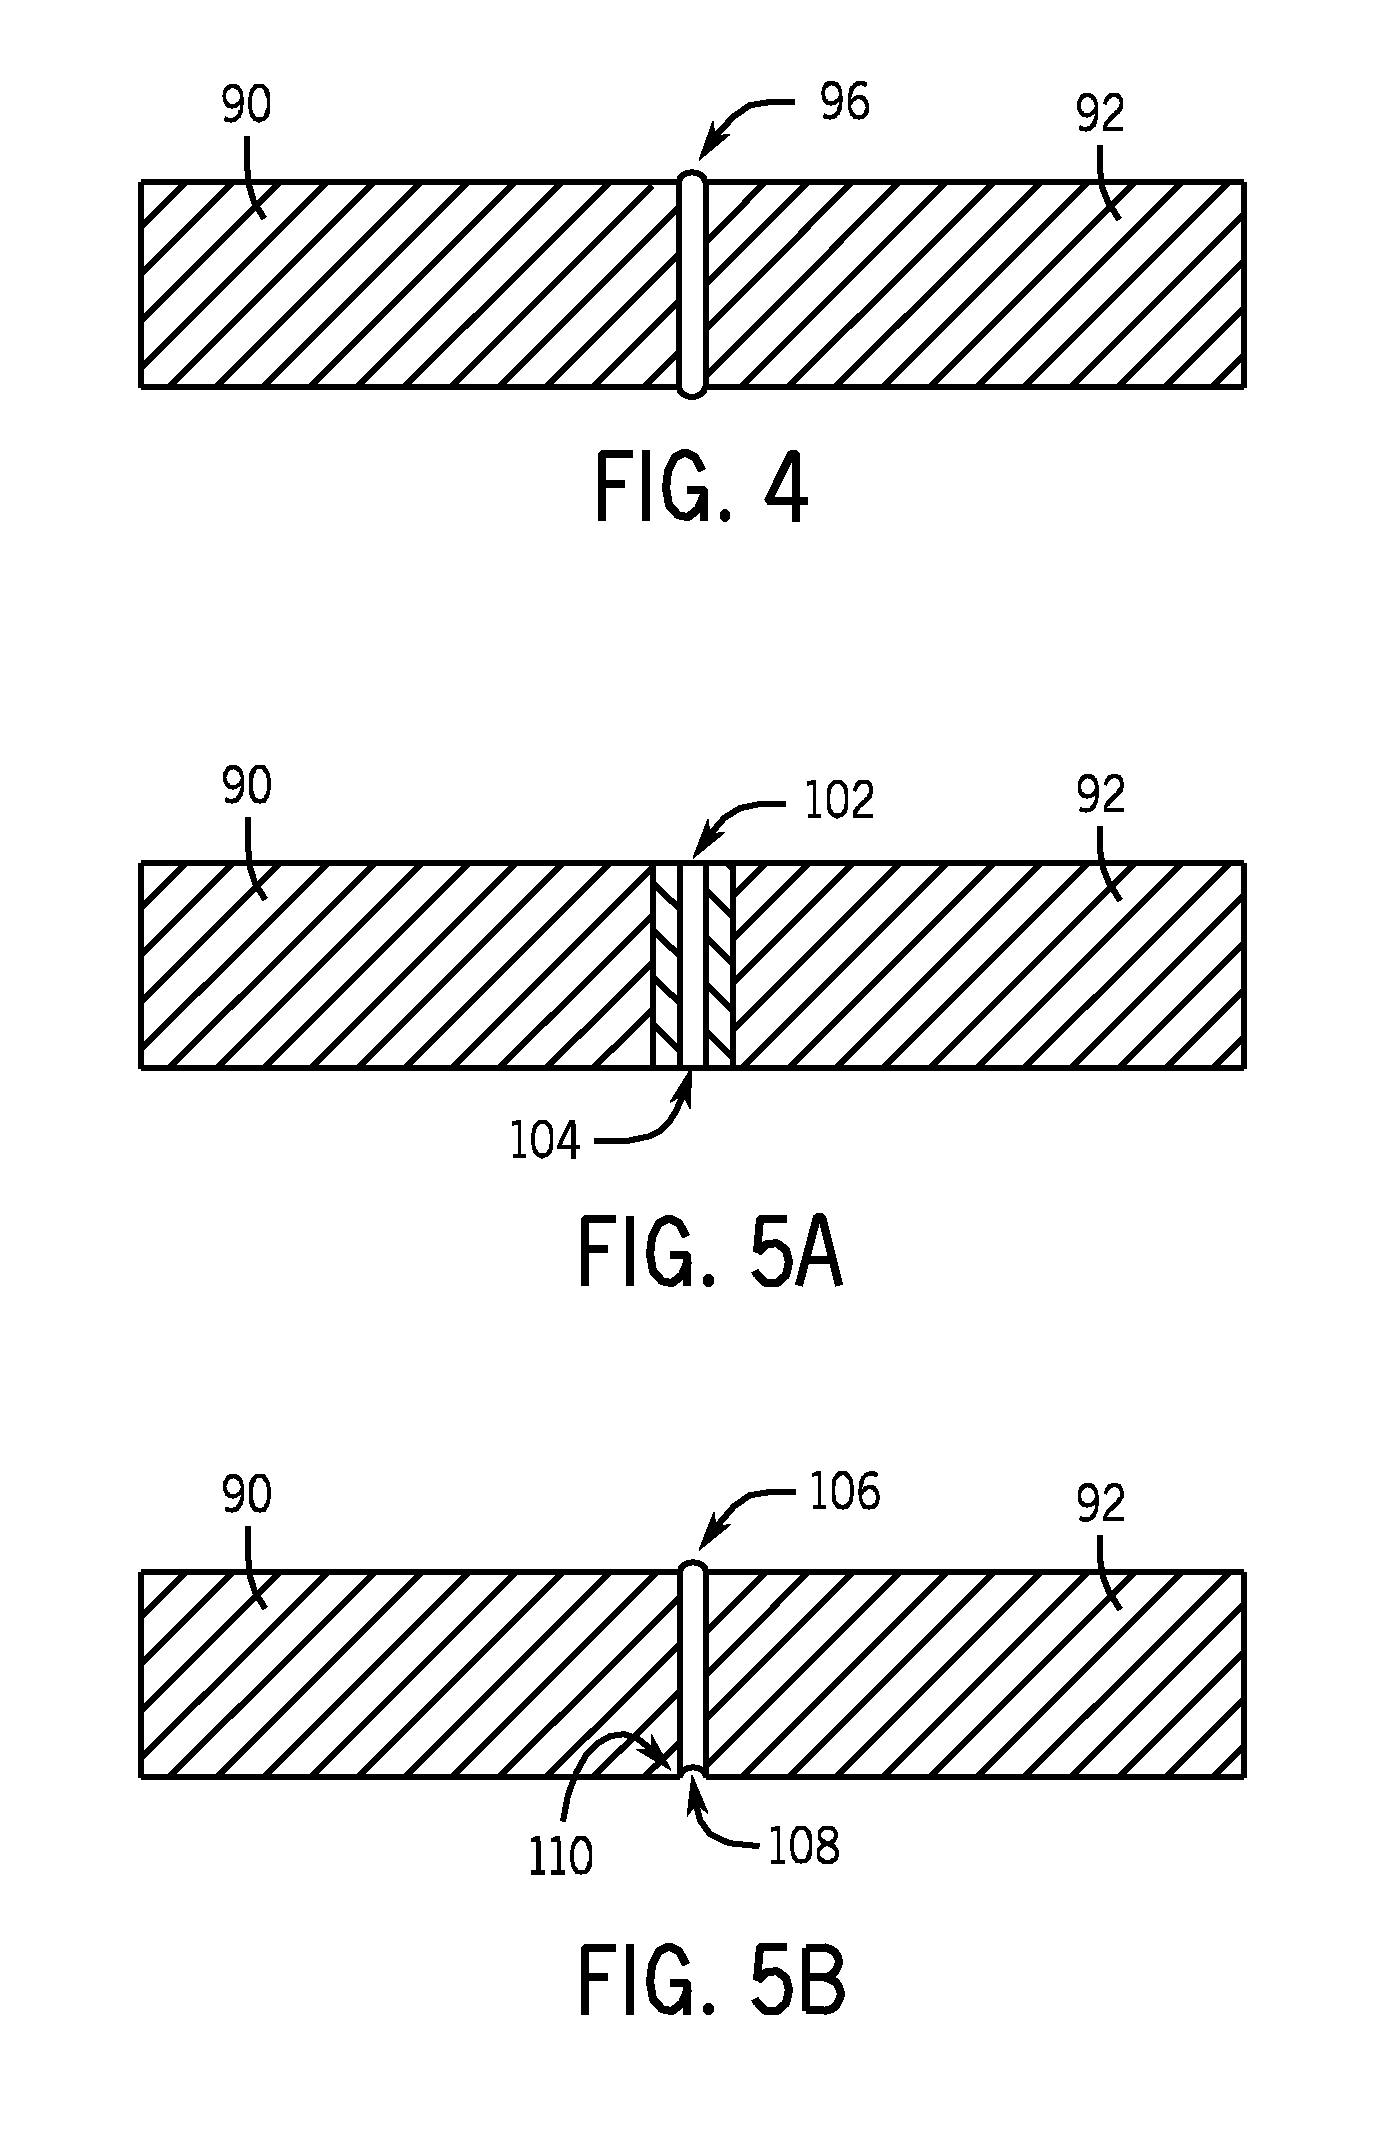 Weld defect detection systems and methods for laser hybrid welding